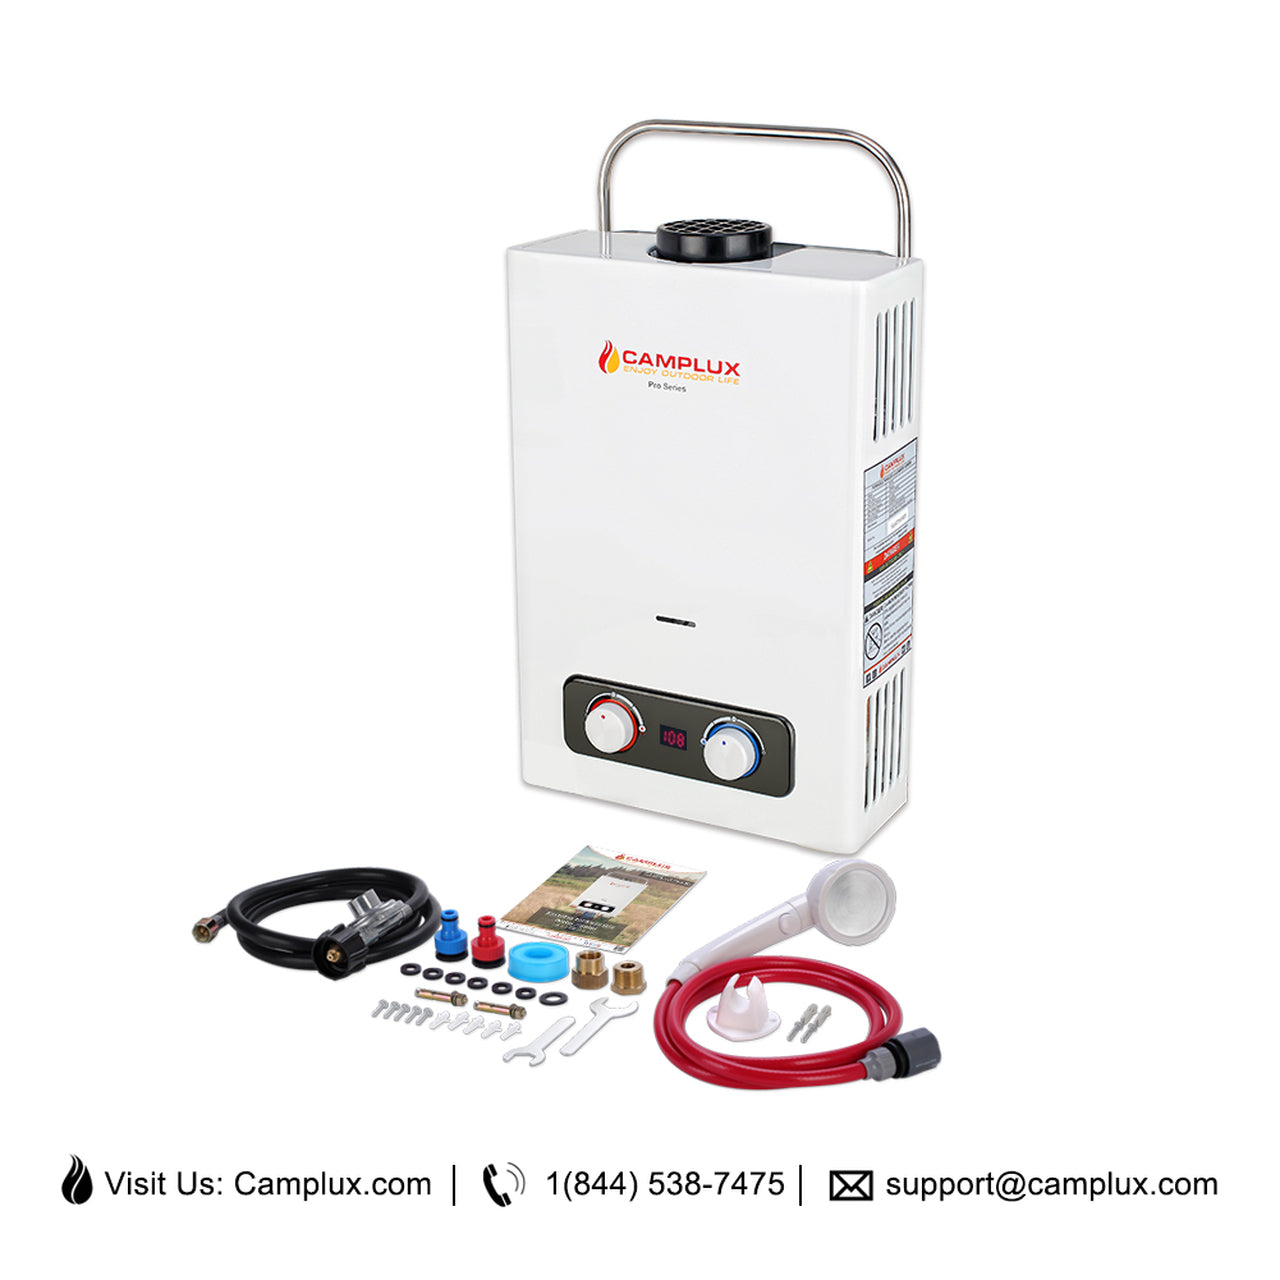 Camplux Pro Series 6L 1.58 GPM Outdoor Portable Tankless Gas Water